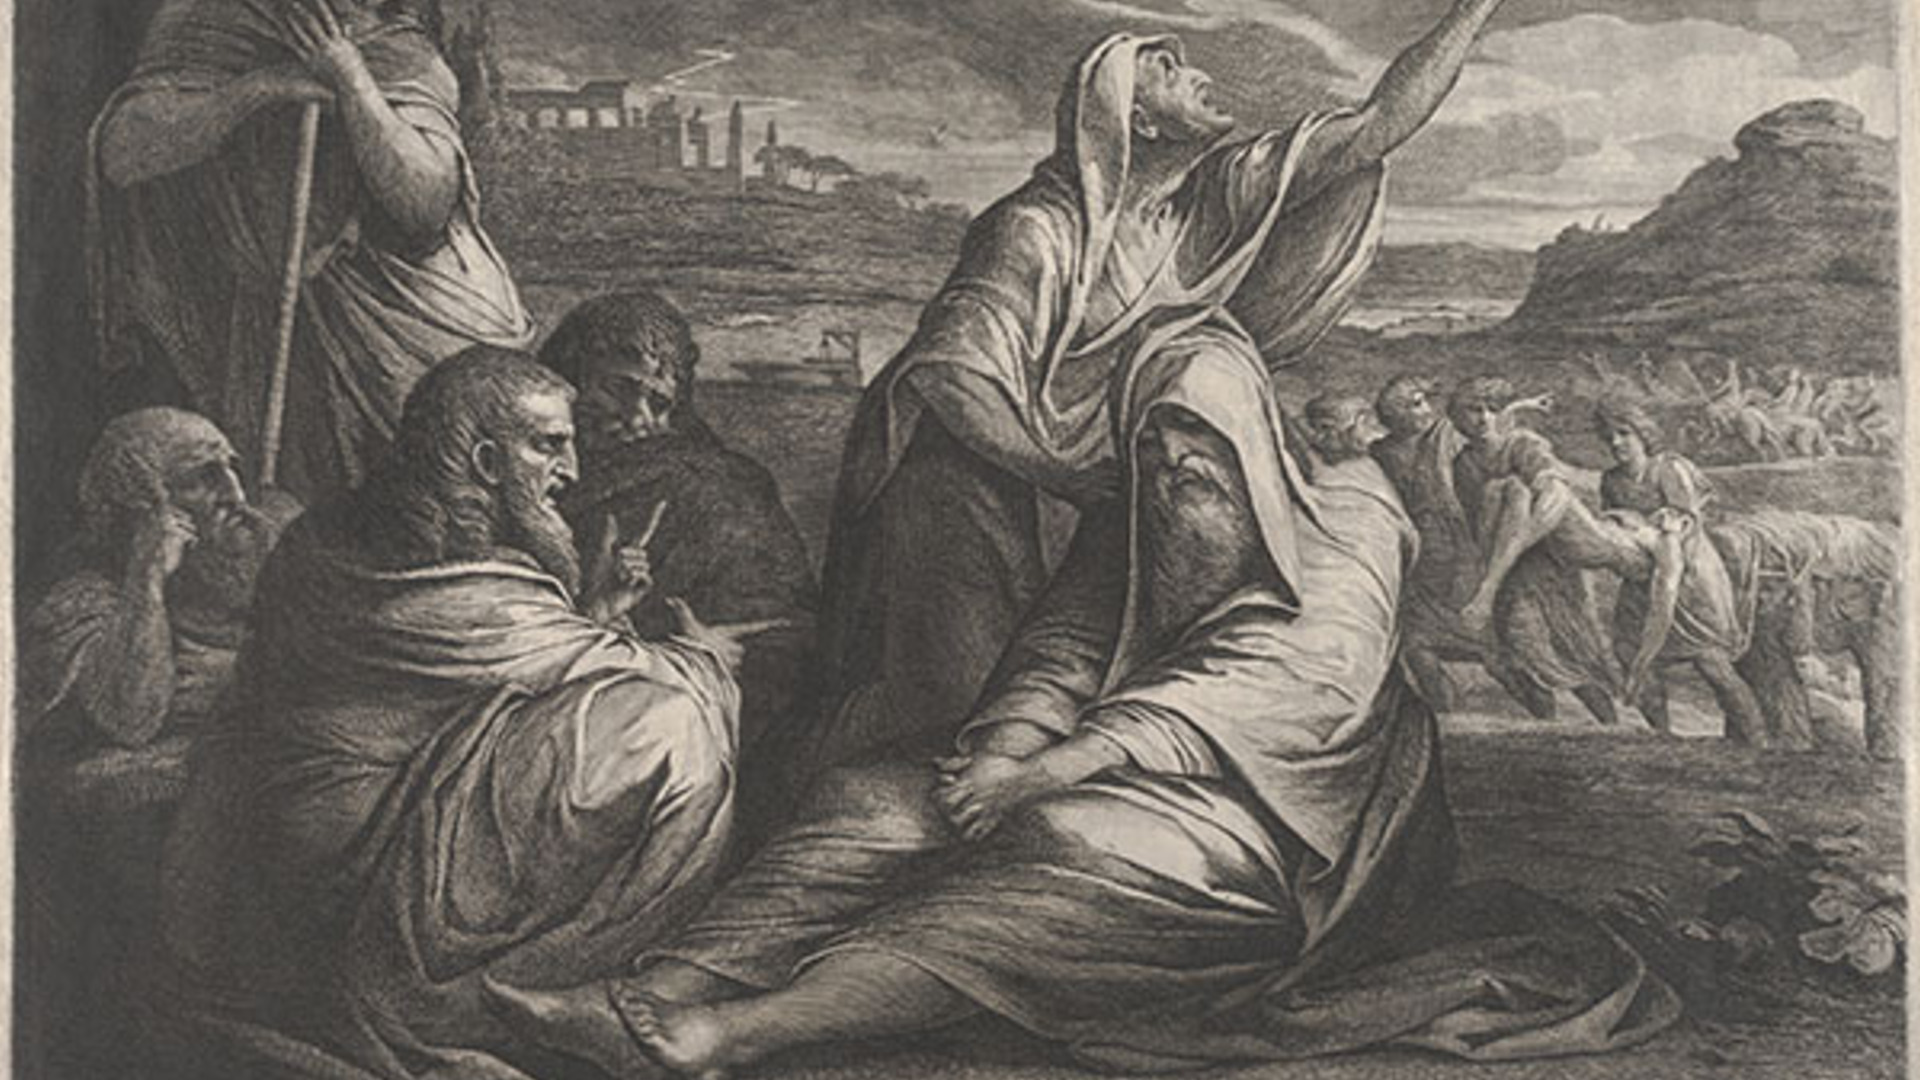 James Barry (Irish, 1741–1806), <em>Job Reproved by His Friends</em>, 1776/ca. 1790, etching and engraving with aquatint and roulette on wove paper, 22.9 x 29.6 inches. Gift of William and Nancy Pressly in honor of the Stent Family, 2015.002.002 (detail)